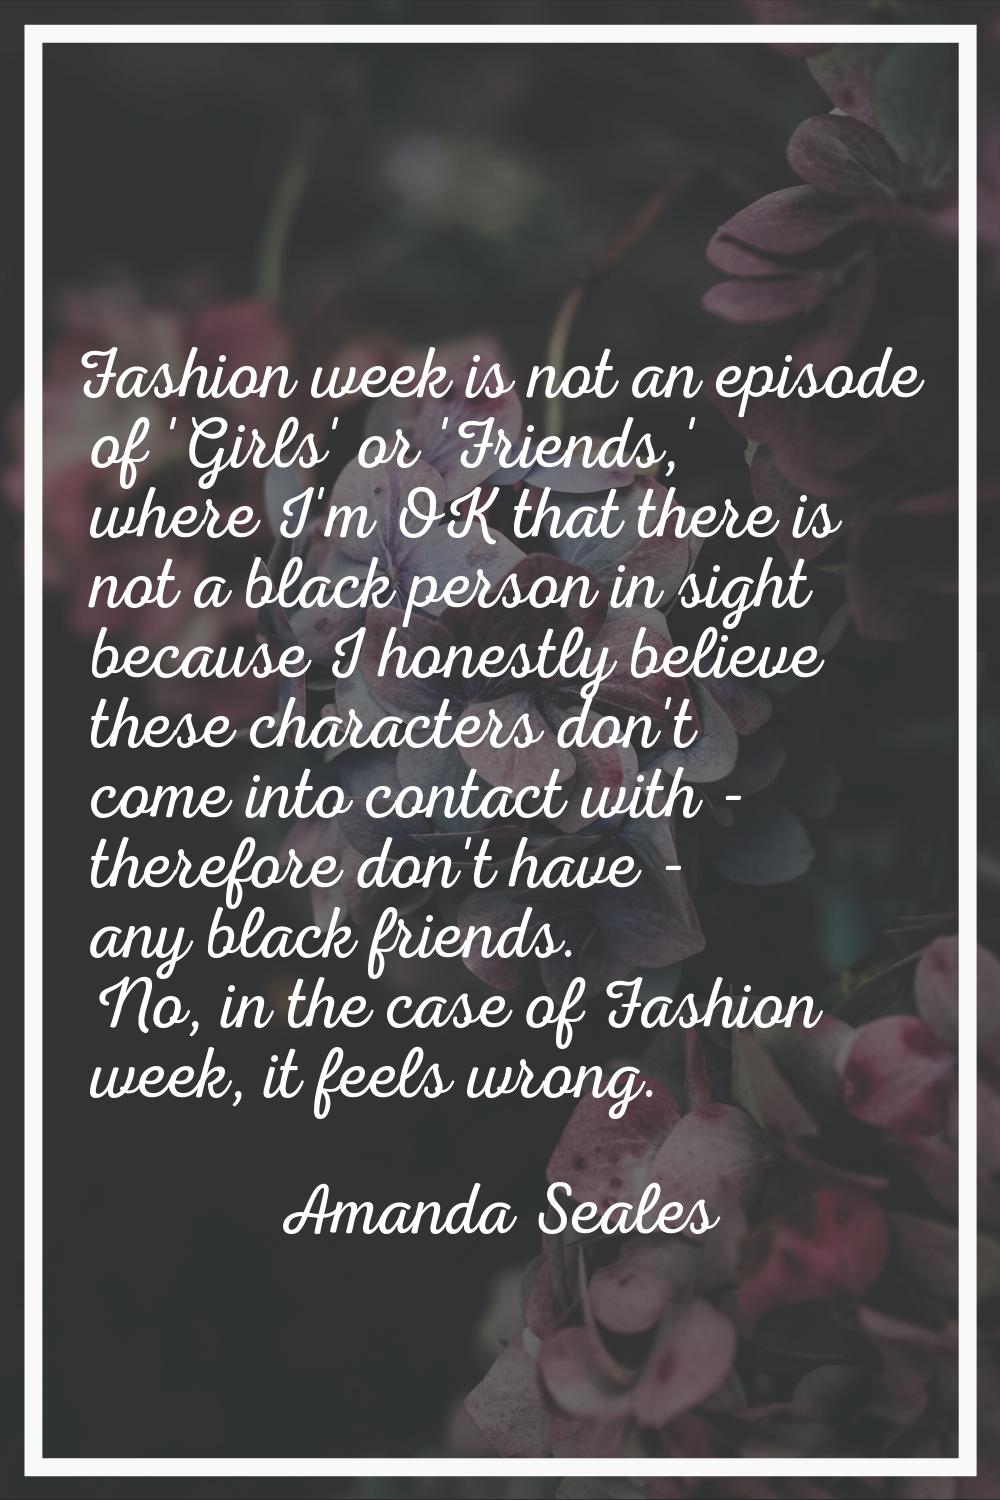 Fashion week is not an episode of 'Girls' or 'Friends,' where I'm OK that there is not a black pers